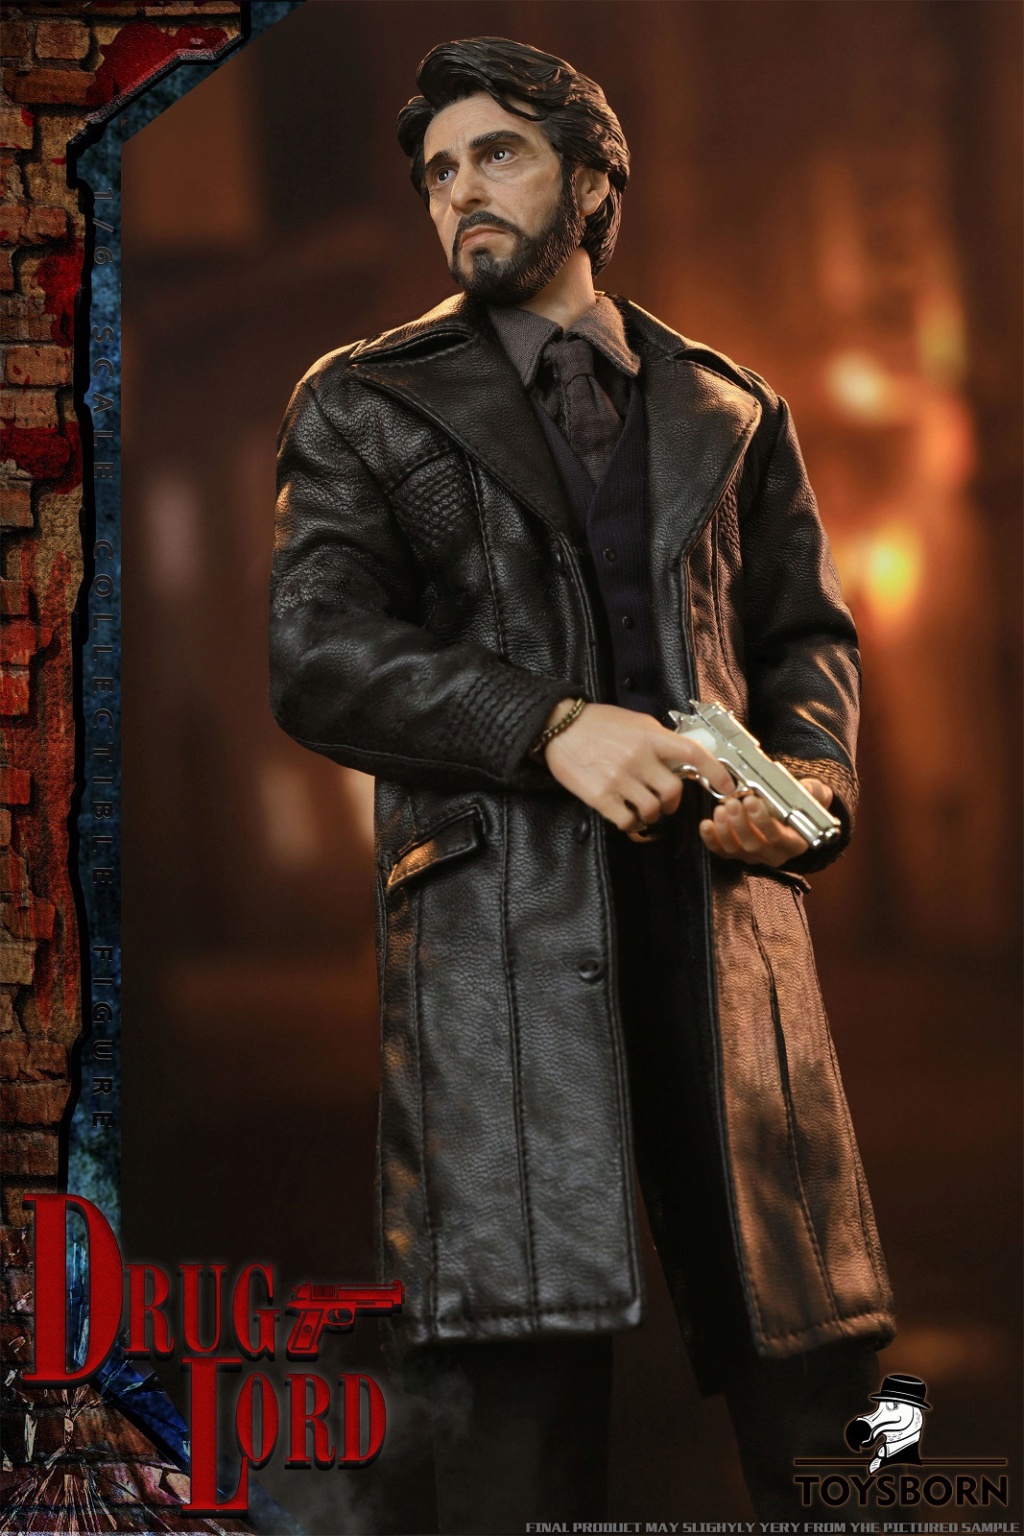 NEW PRODUCT: TOYS BORN: TB003 1/6 Scale The Drug Lord 21043710